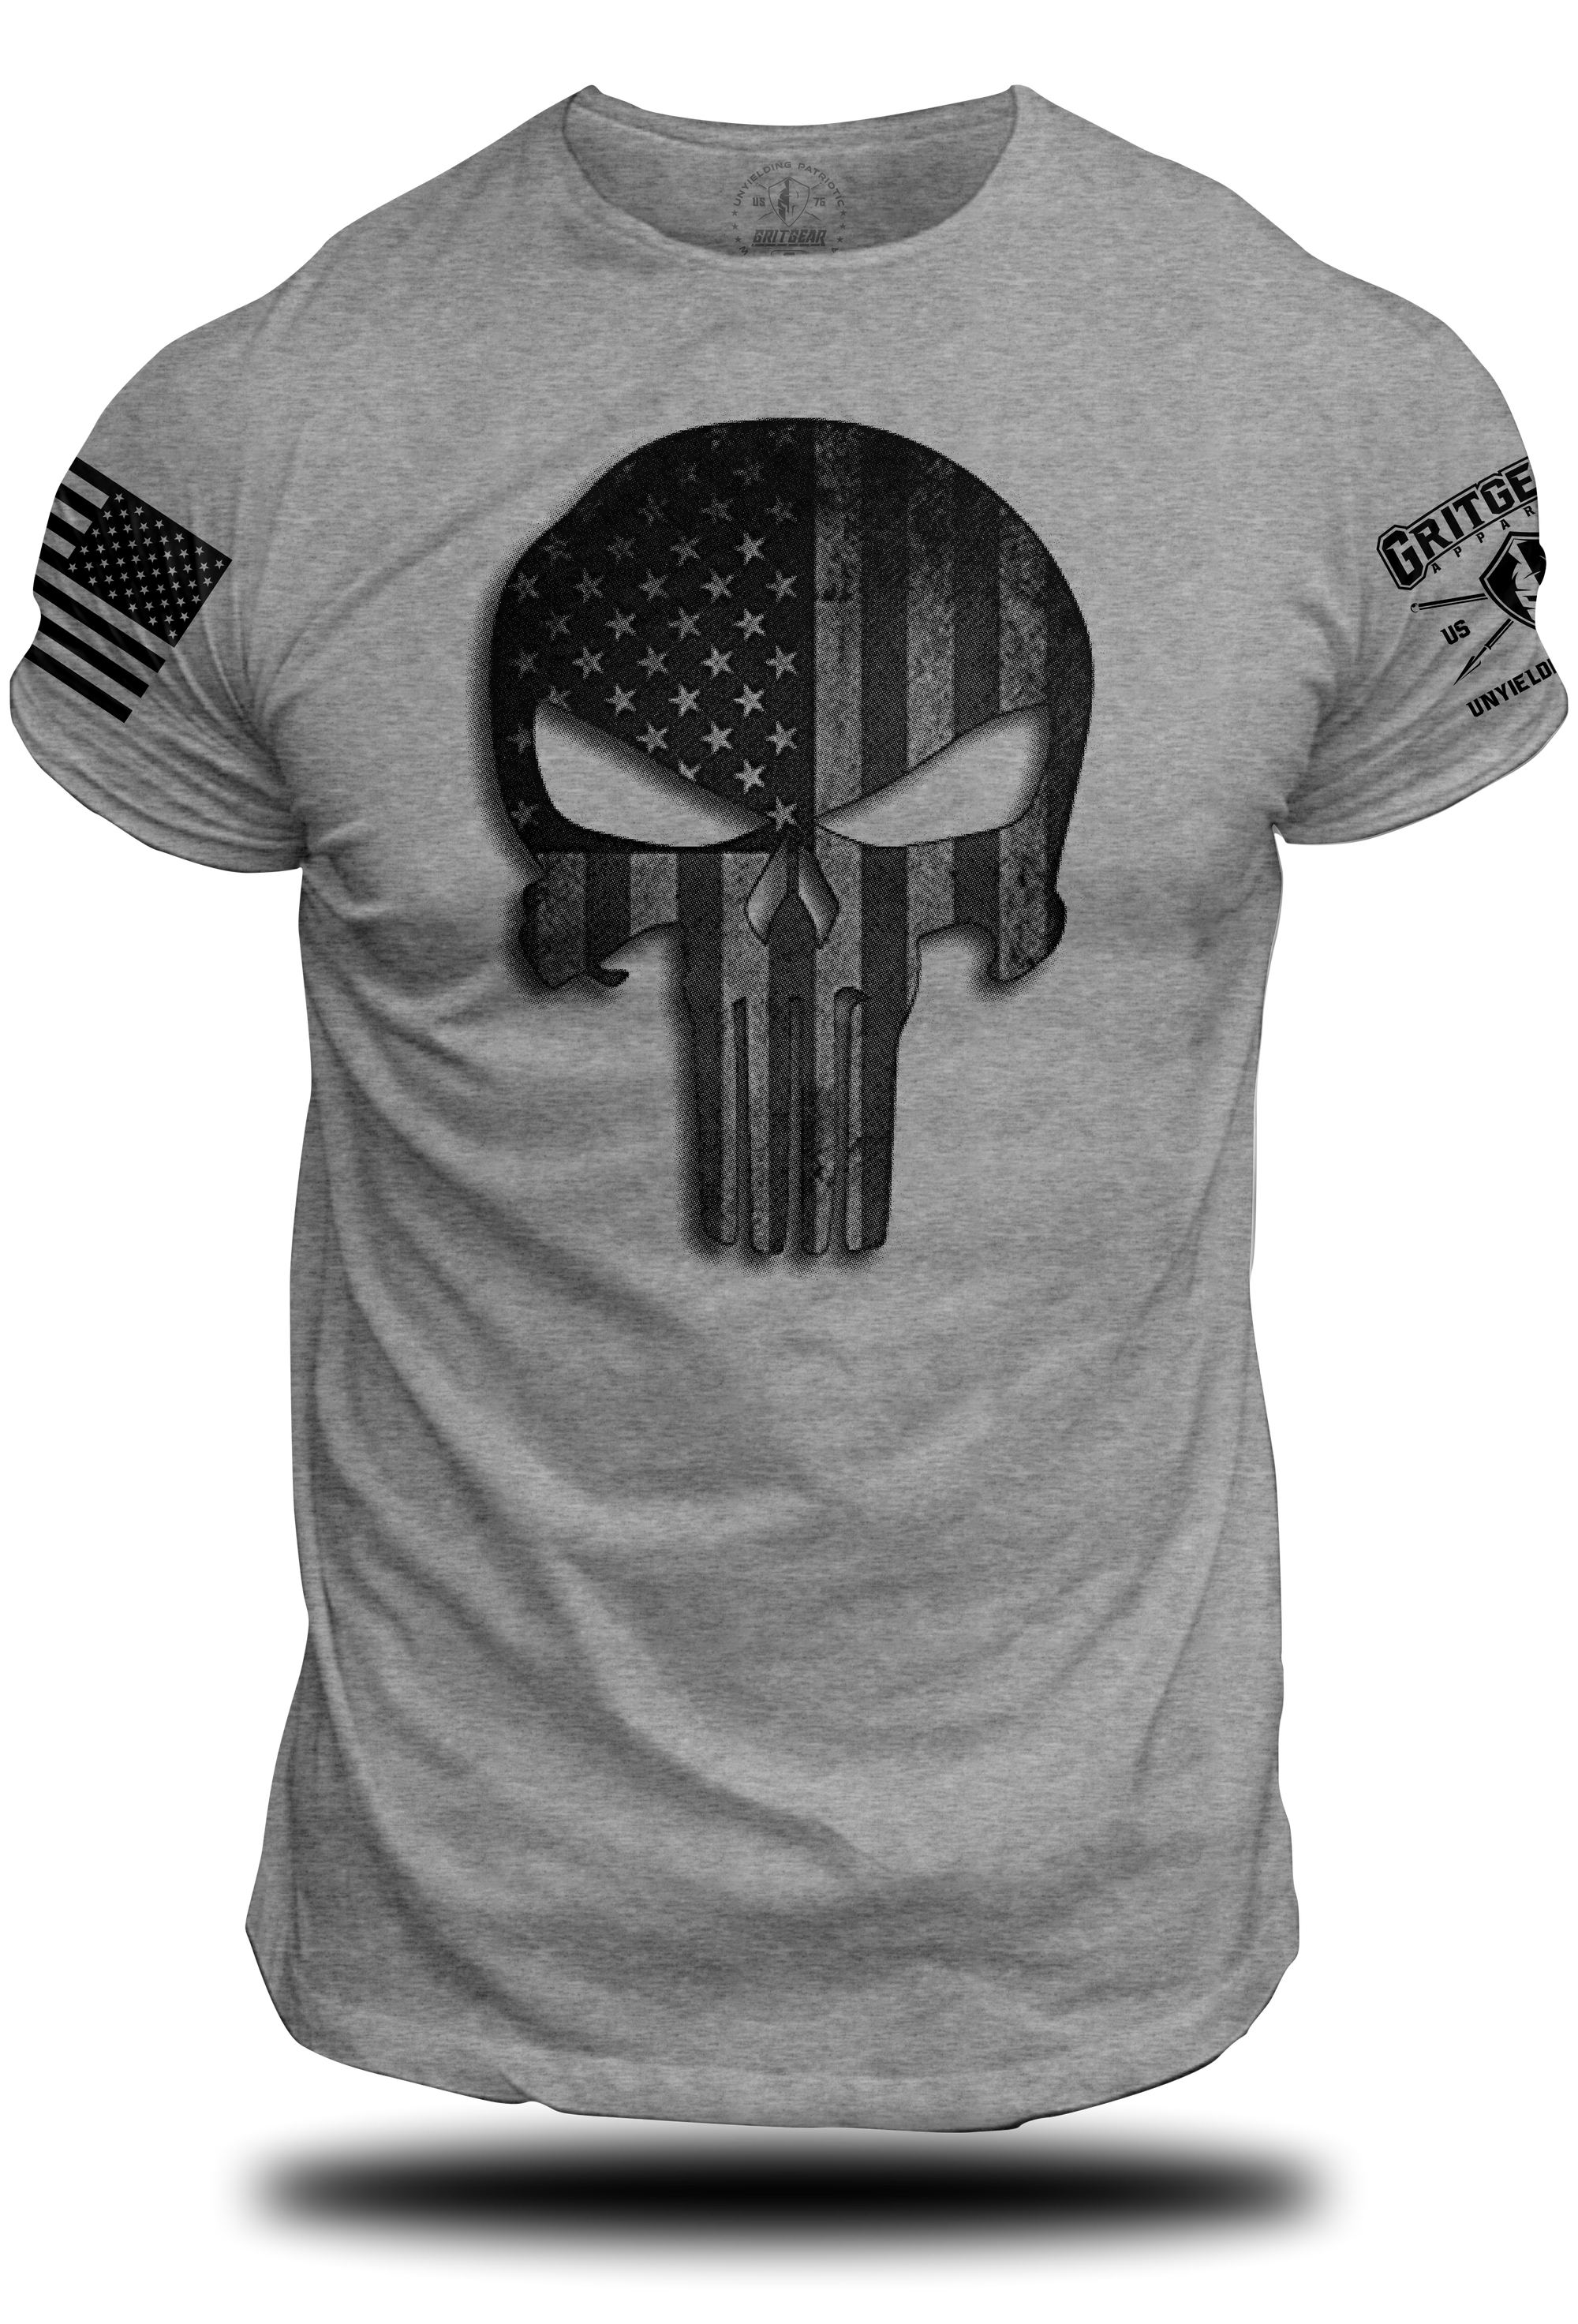 Punisher Stars and Stripes Tee | Grit Gear Apparel